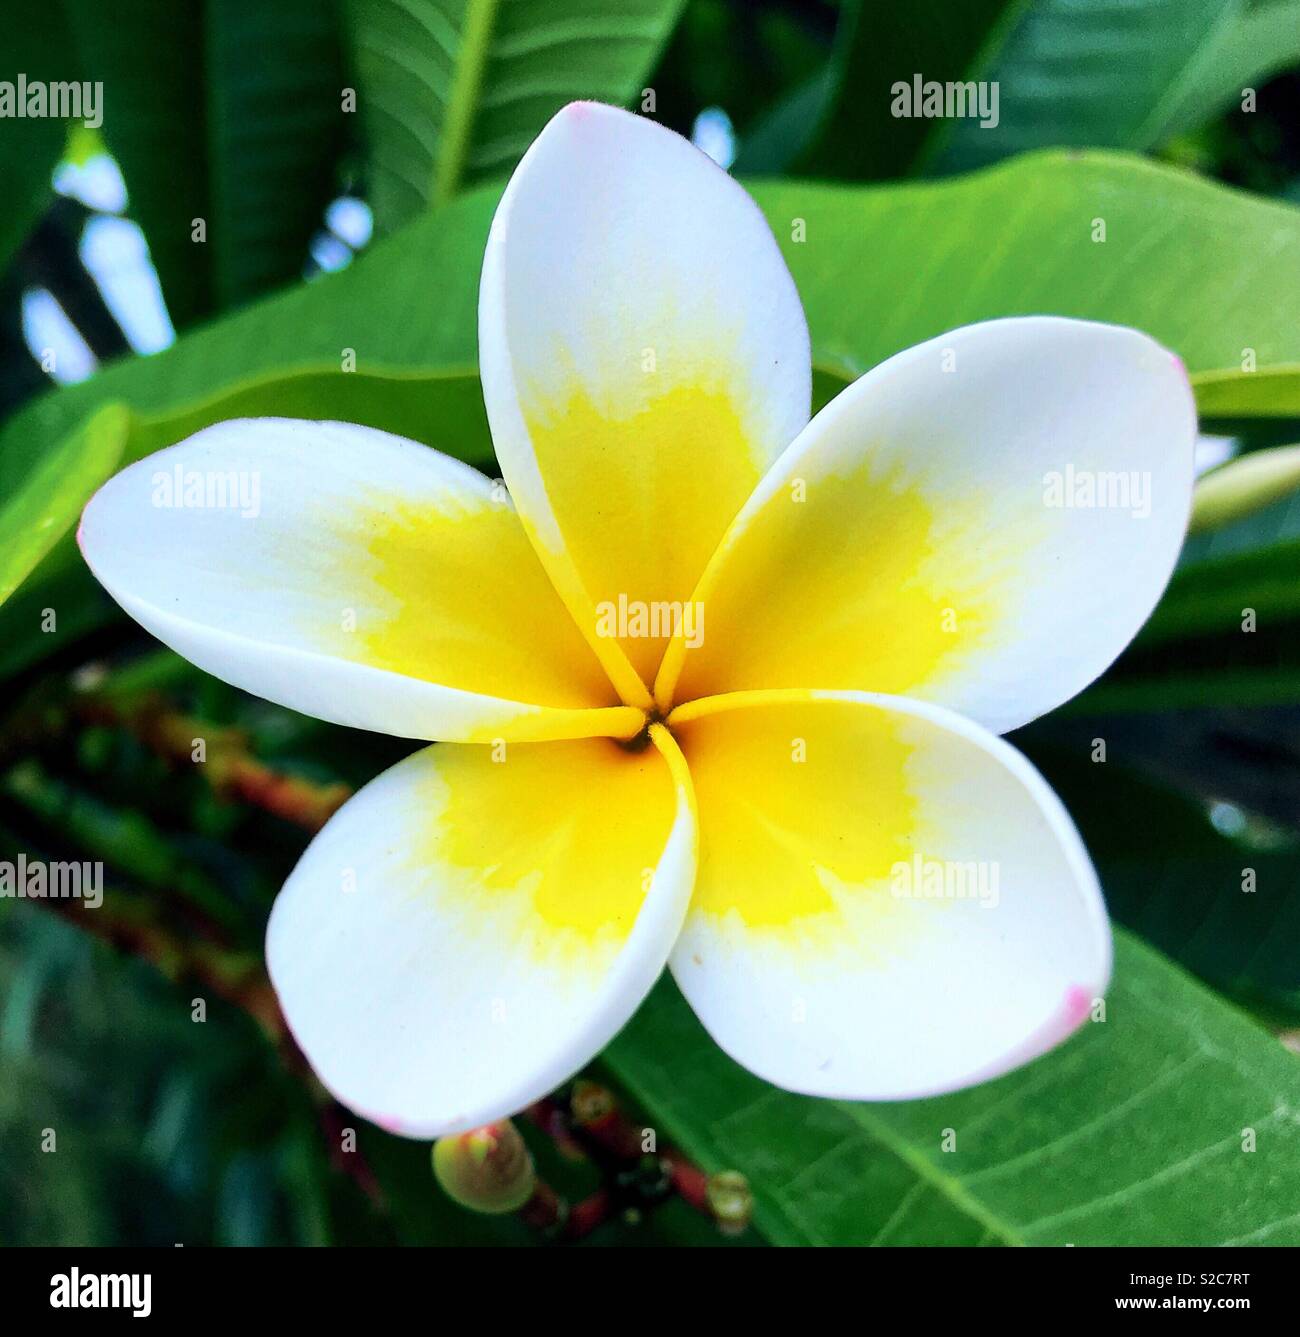 Plumeria Alba is an attractive plant that appears to be one of the iconic tropical flowers Stock Photo